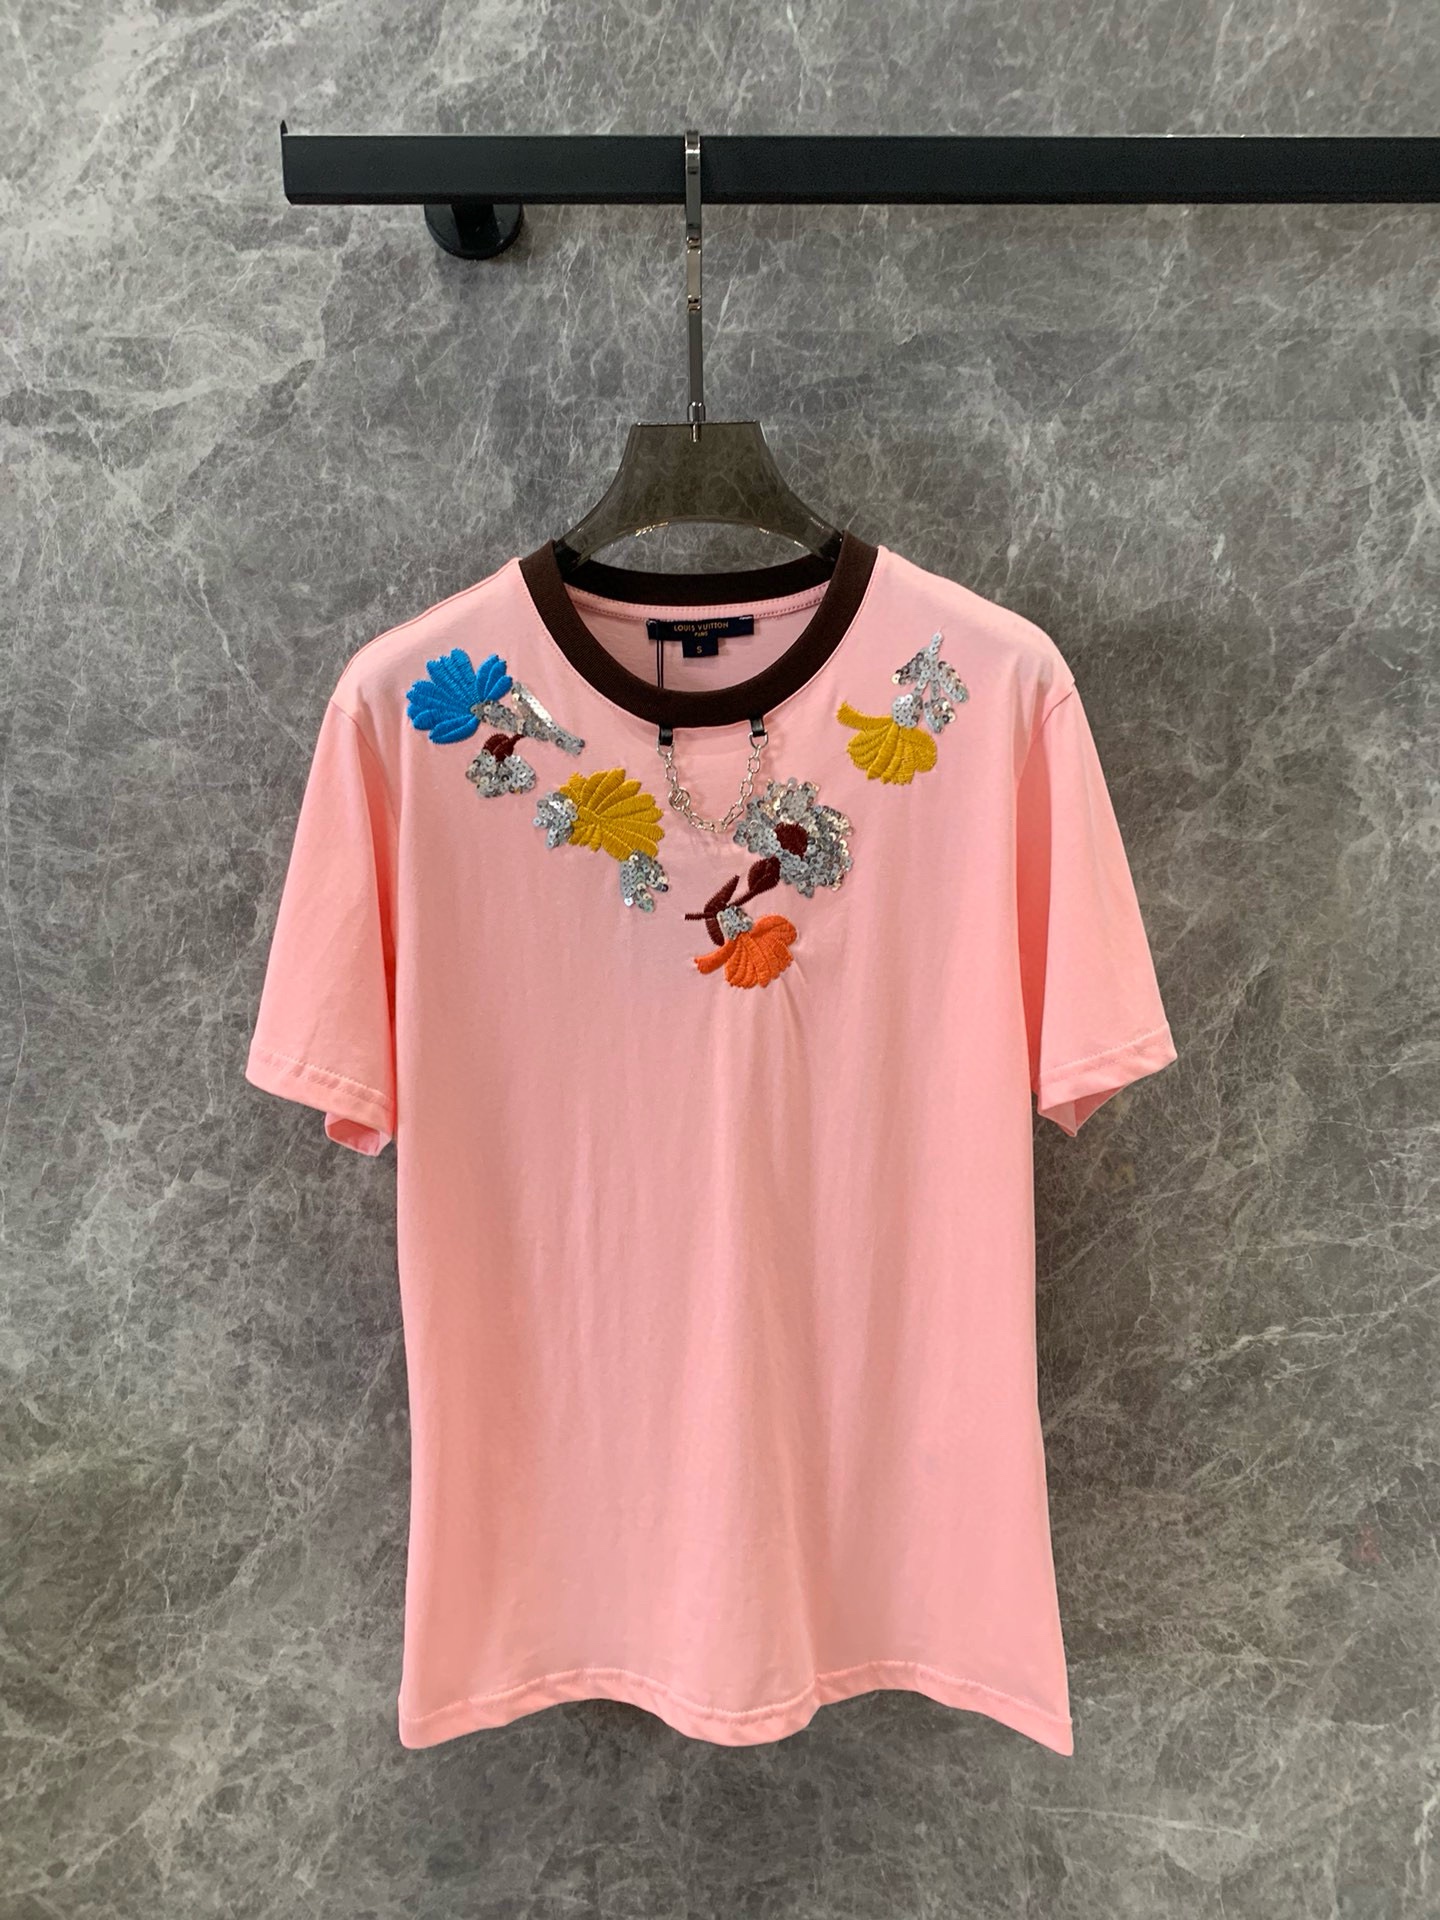 Louis Vuitton Clothing T-Shirt Buy The Best Replica
 Embroidery Summer Collection LV Circle Short Sleeve